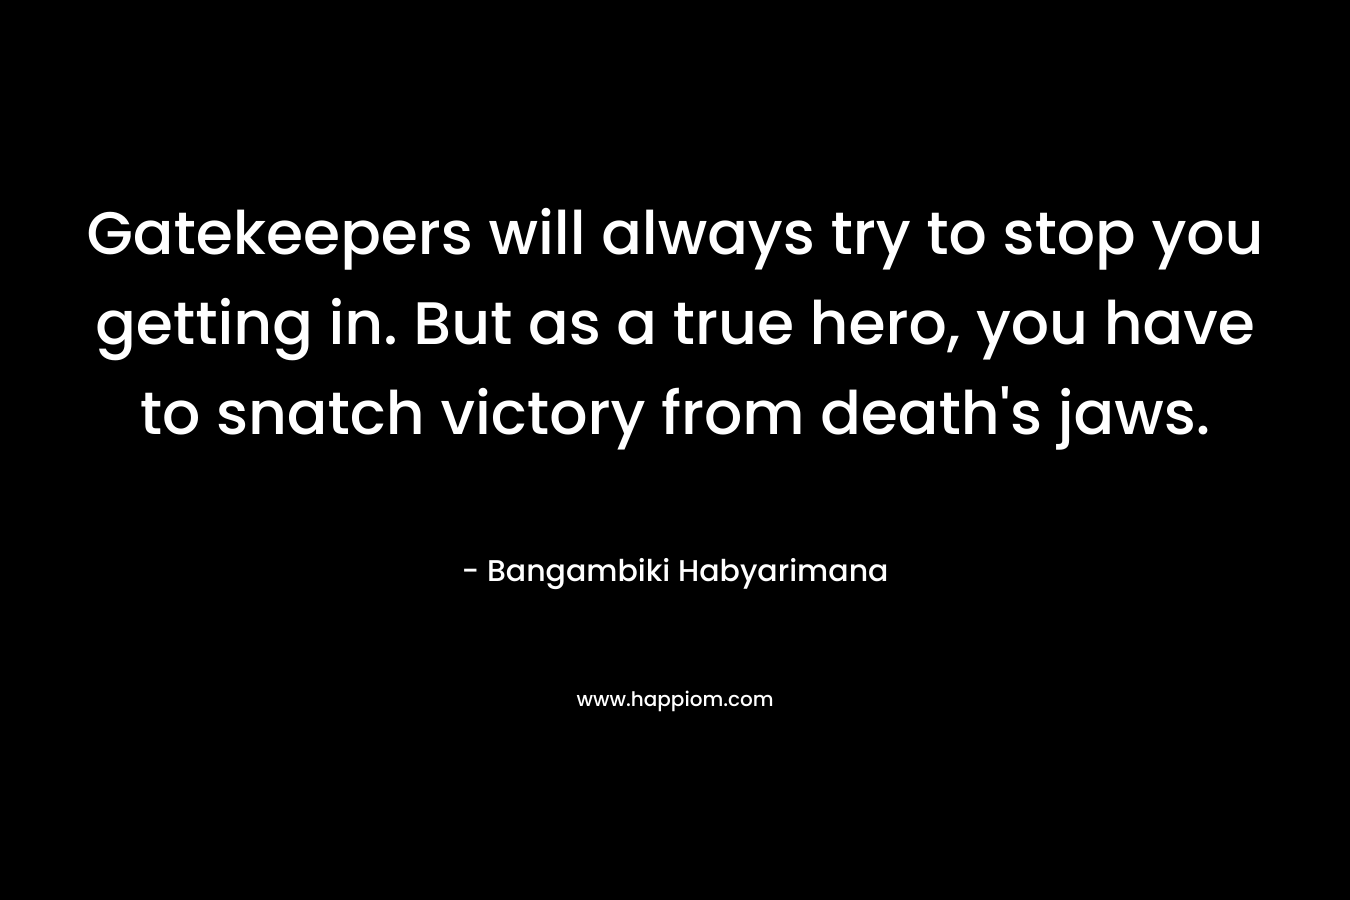 Gatekeepers will always try to stop you getting in. But as a true hero, you have to snatch victory from death’s jaws. – Bangambiki Habyarimana